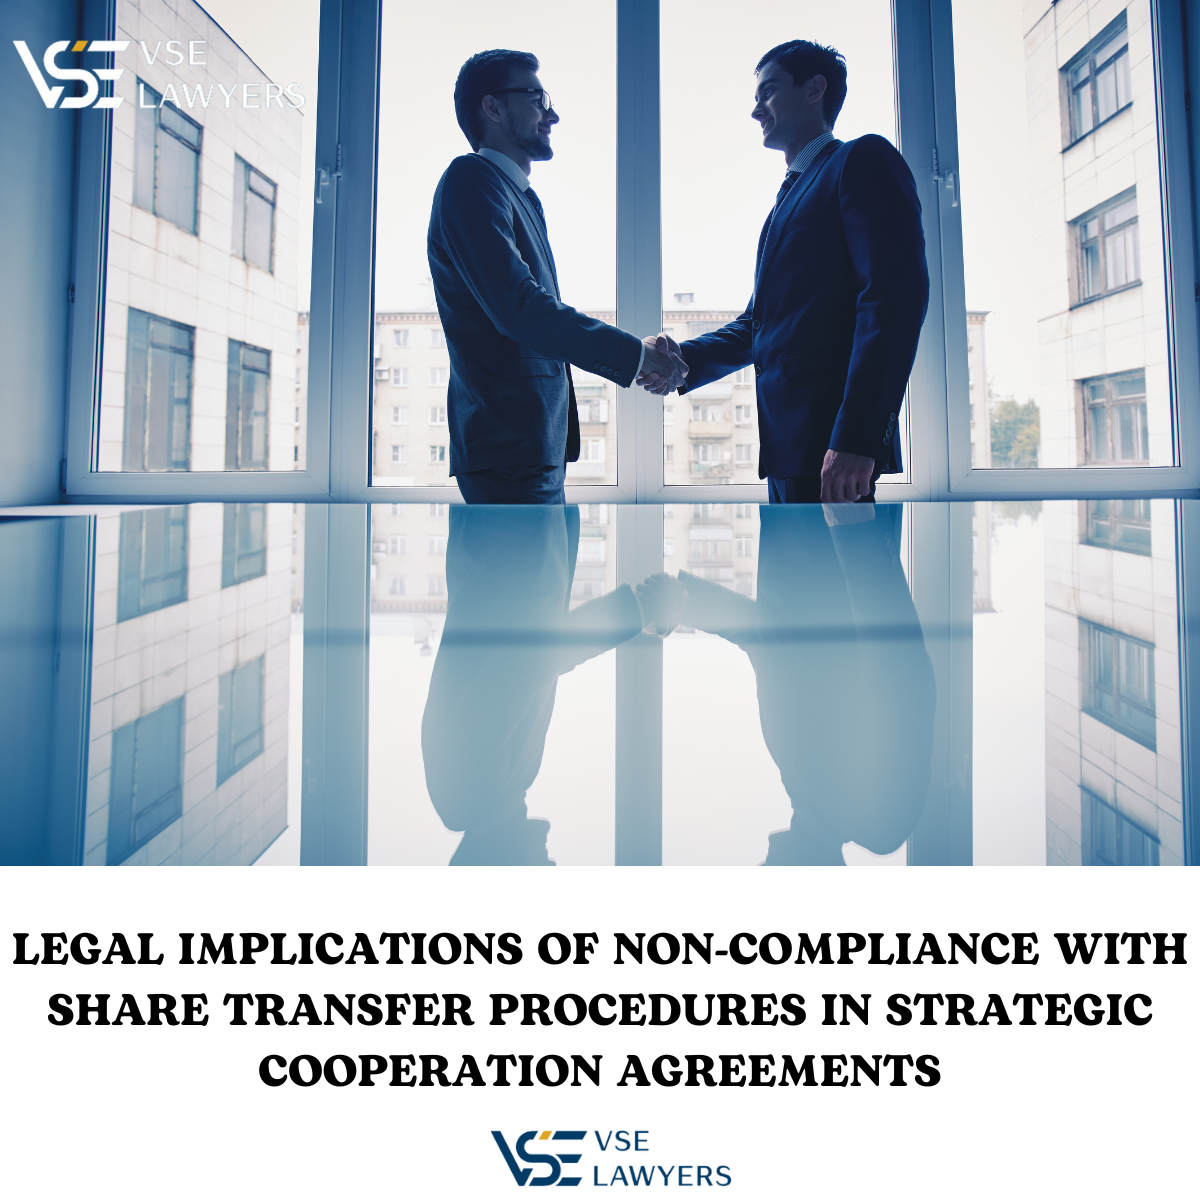 LEGAL IMPLICATIONS OF NON-COMPLIANCE WITH SHARE TRANSFER PROCEDURES IN STRATEGIC COOPERATION AGREEMENTS